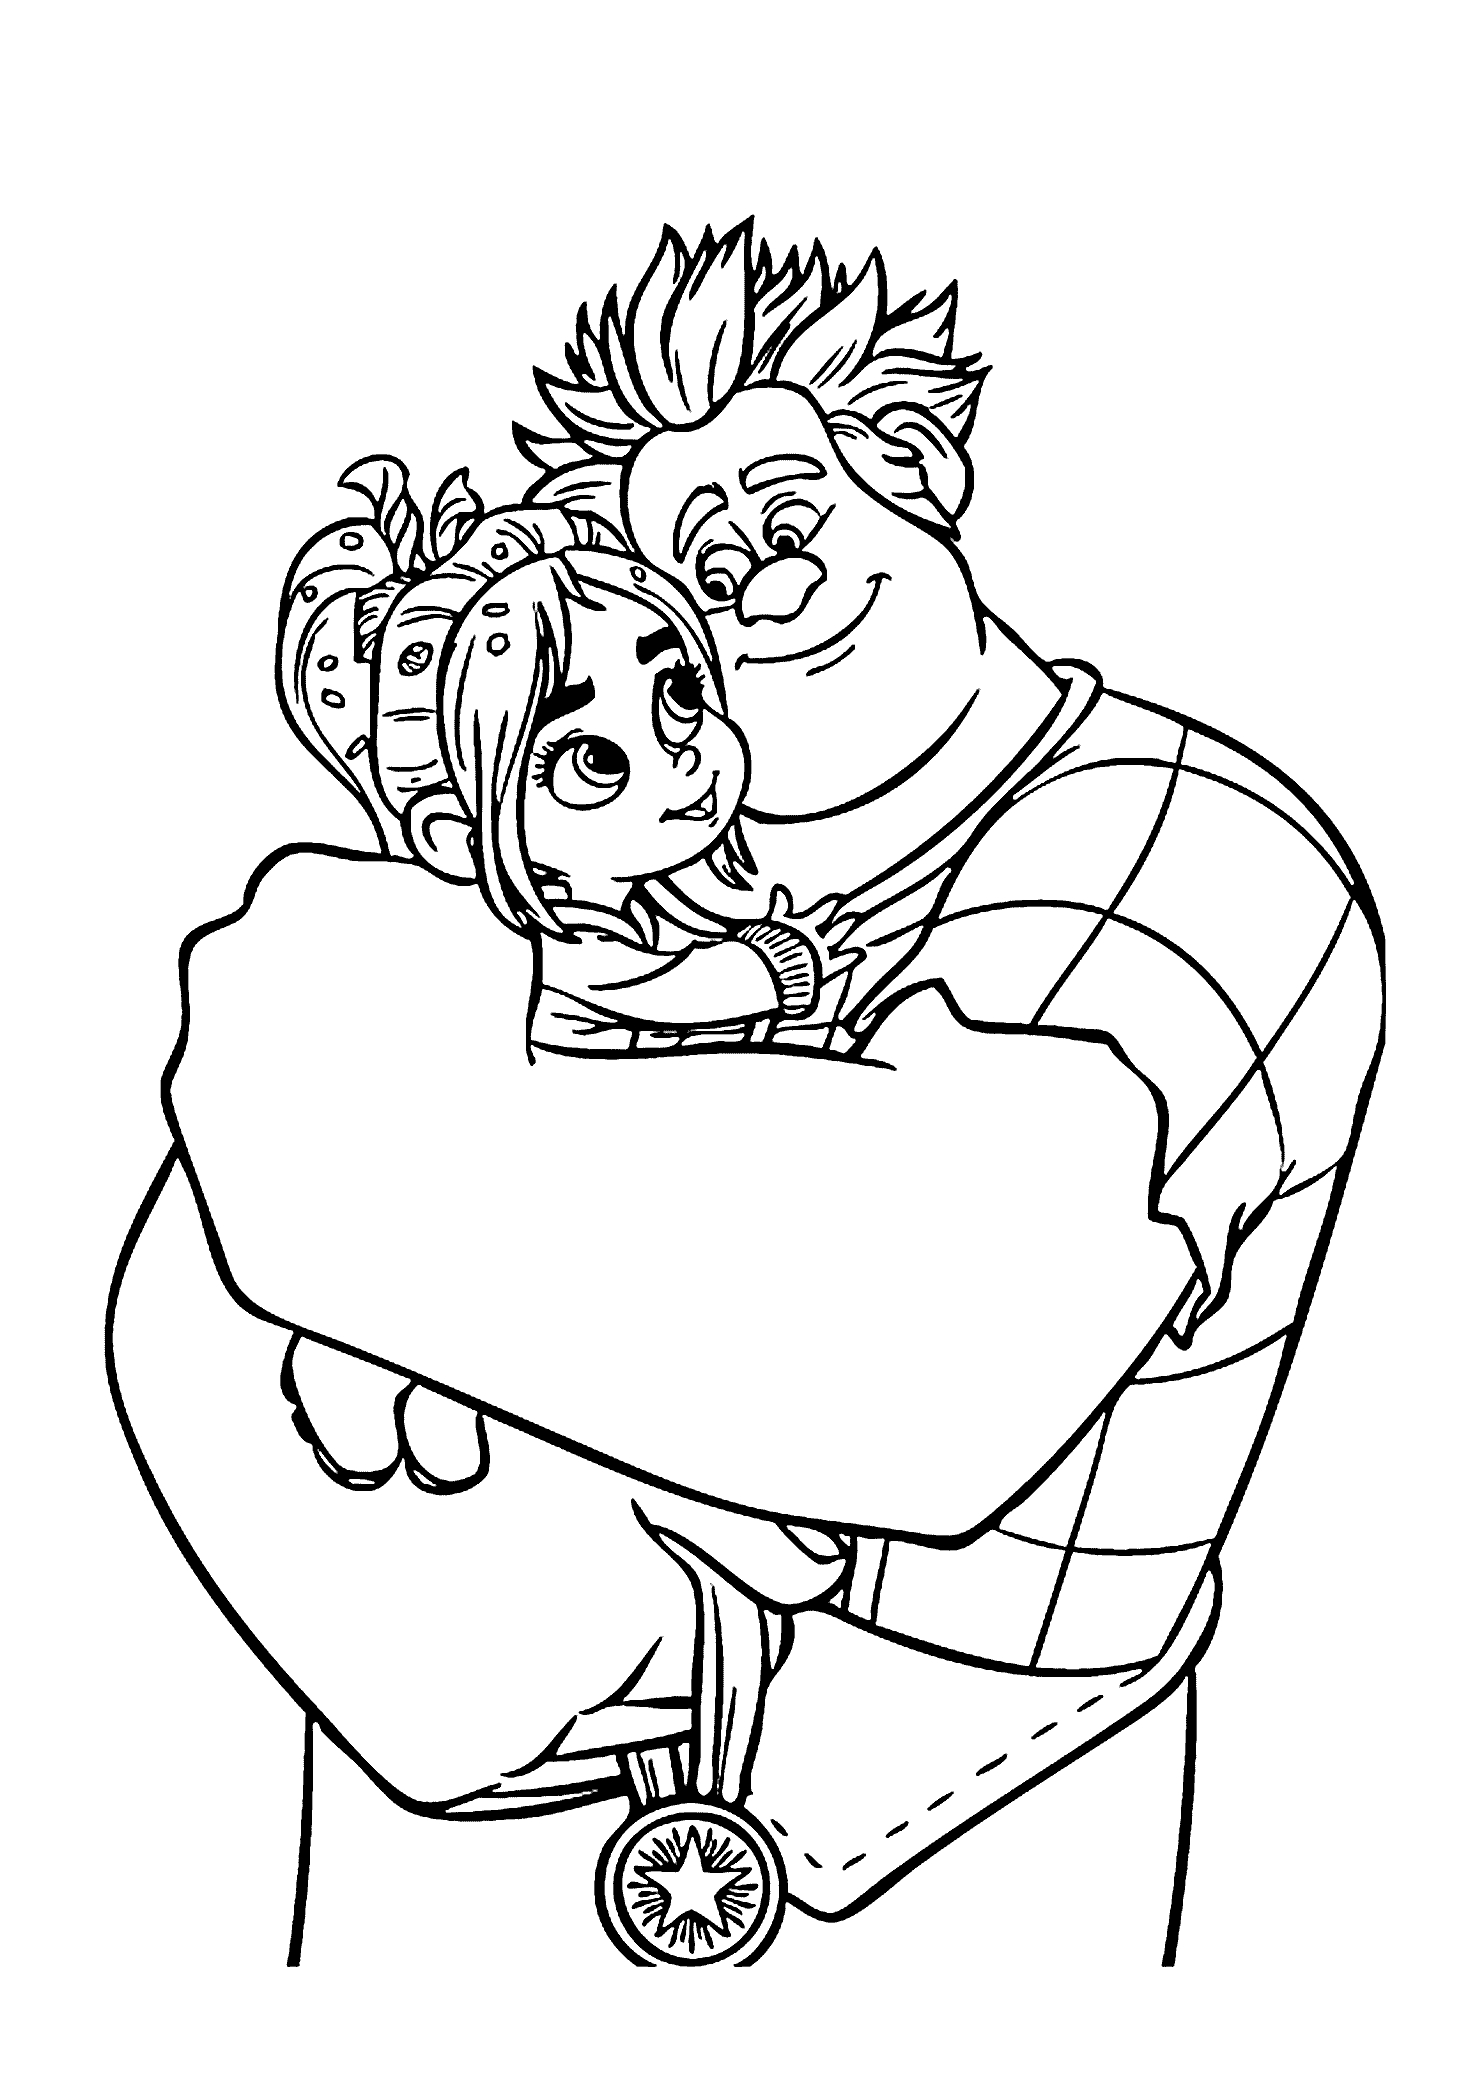 Ralph and Vanellope coloring pages for kids printable free Collection Coloring  Page - Free Printable Coloring Pages for Kids